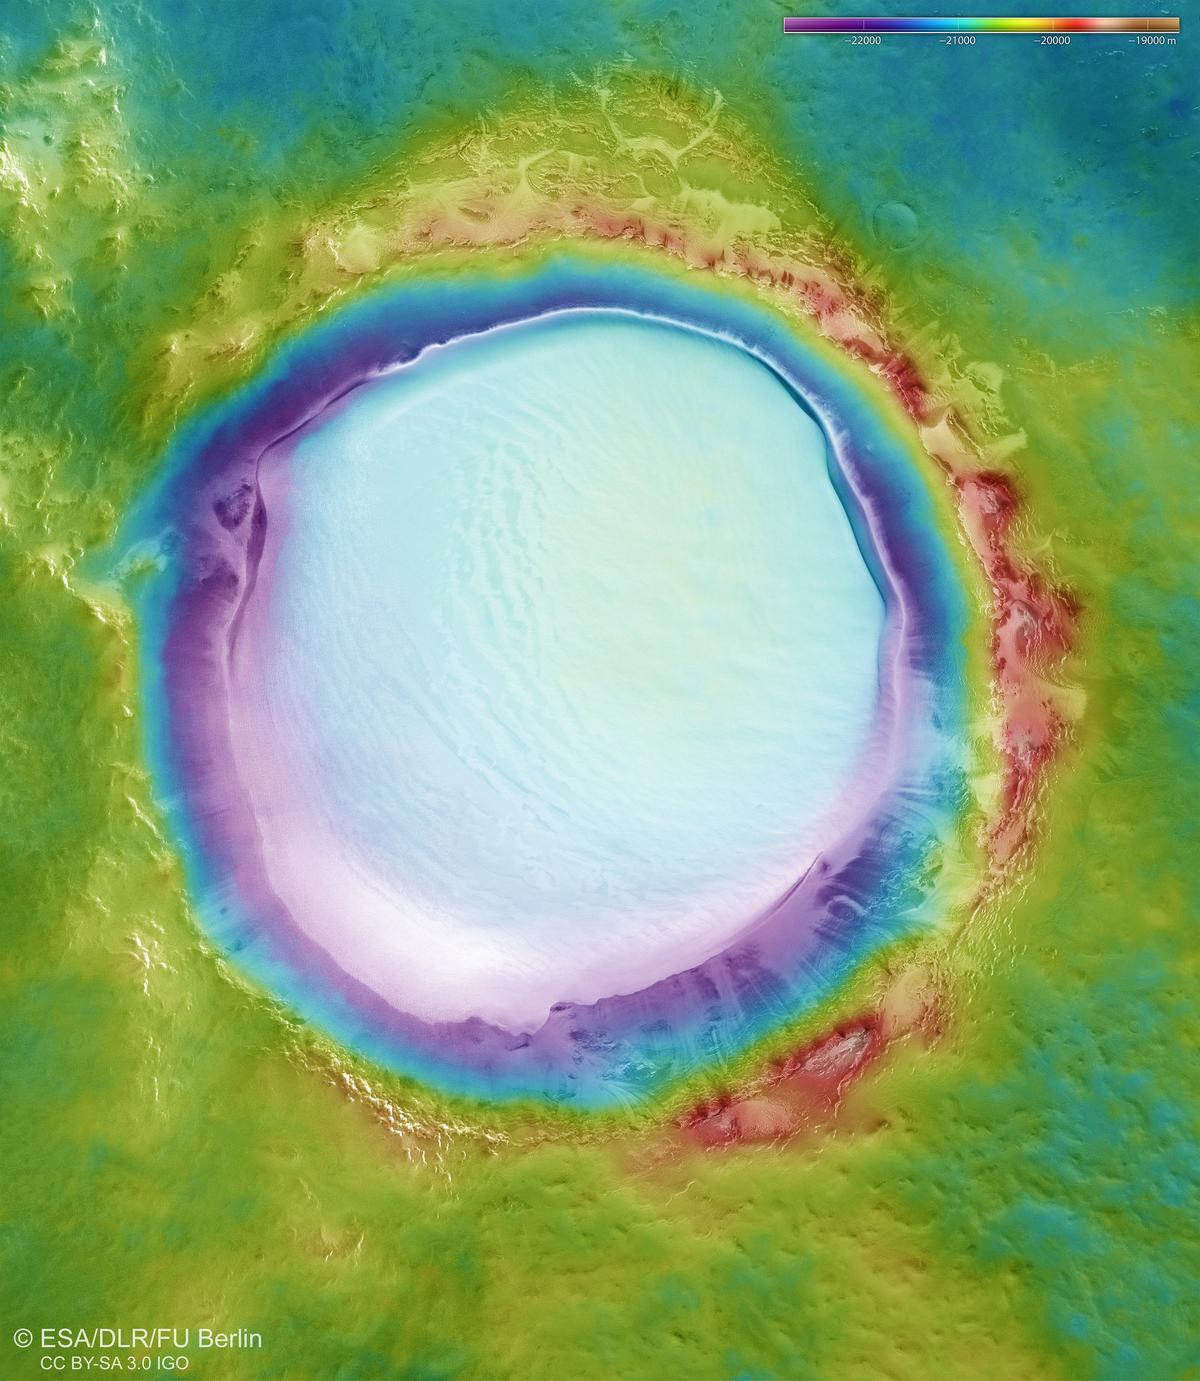 Topography of Korolev crater